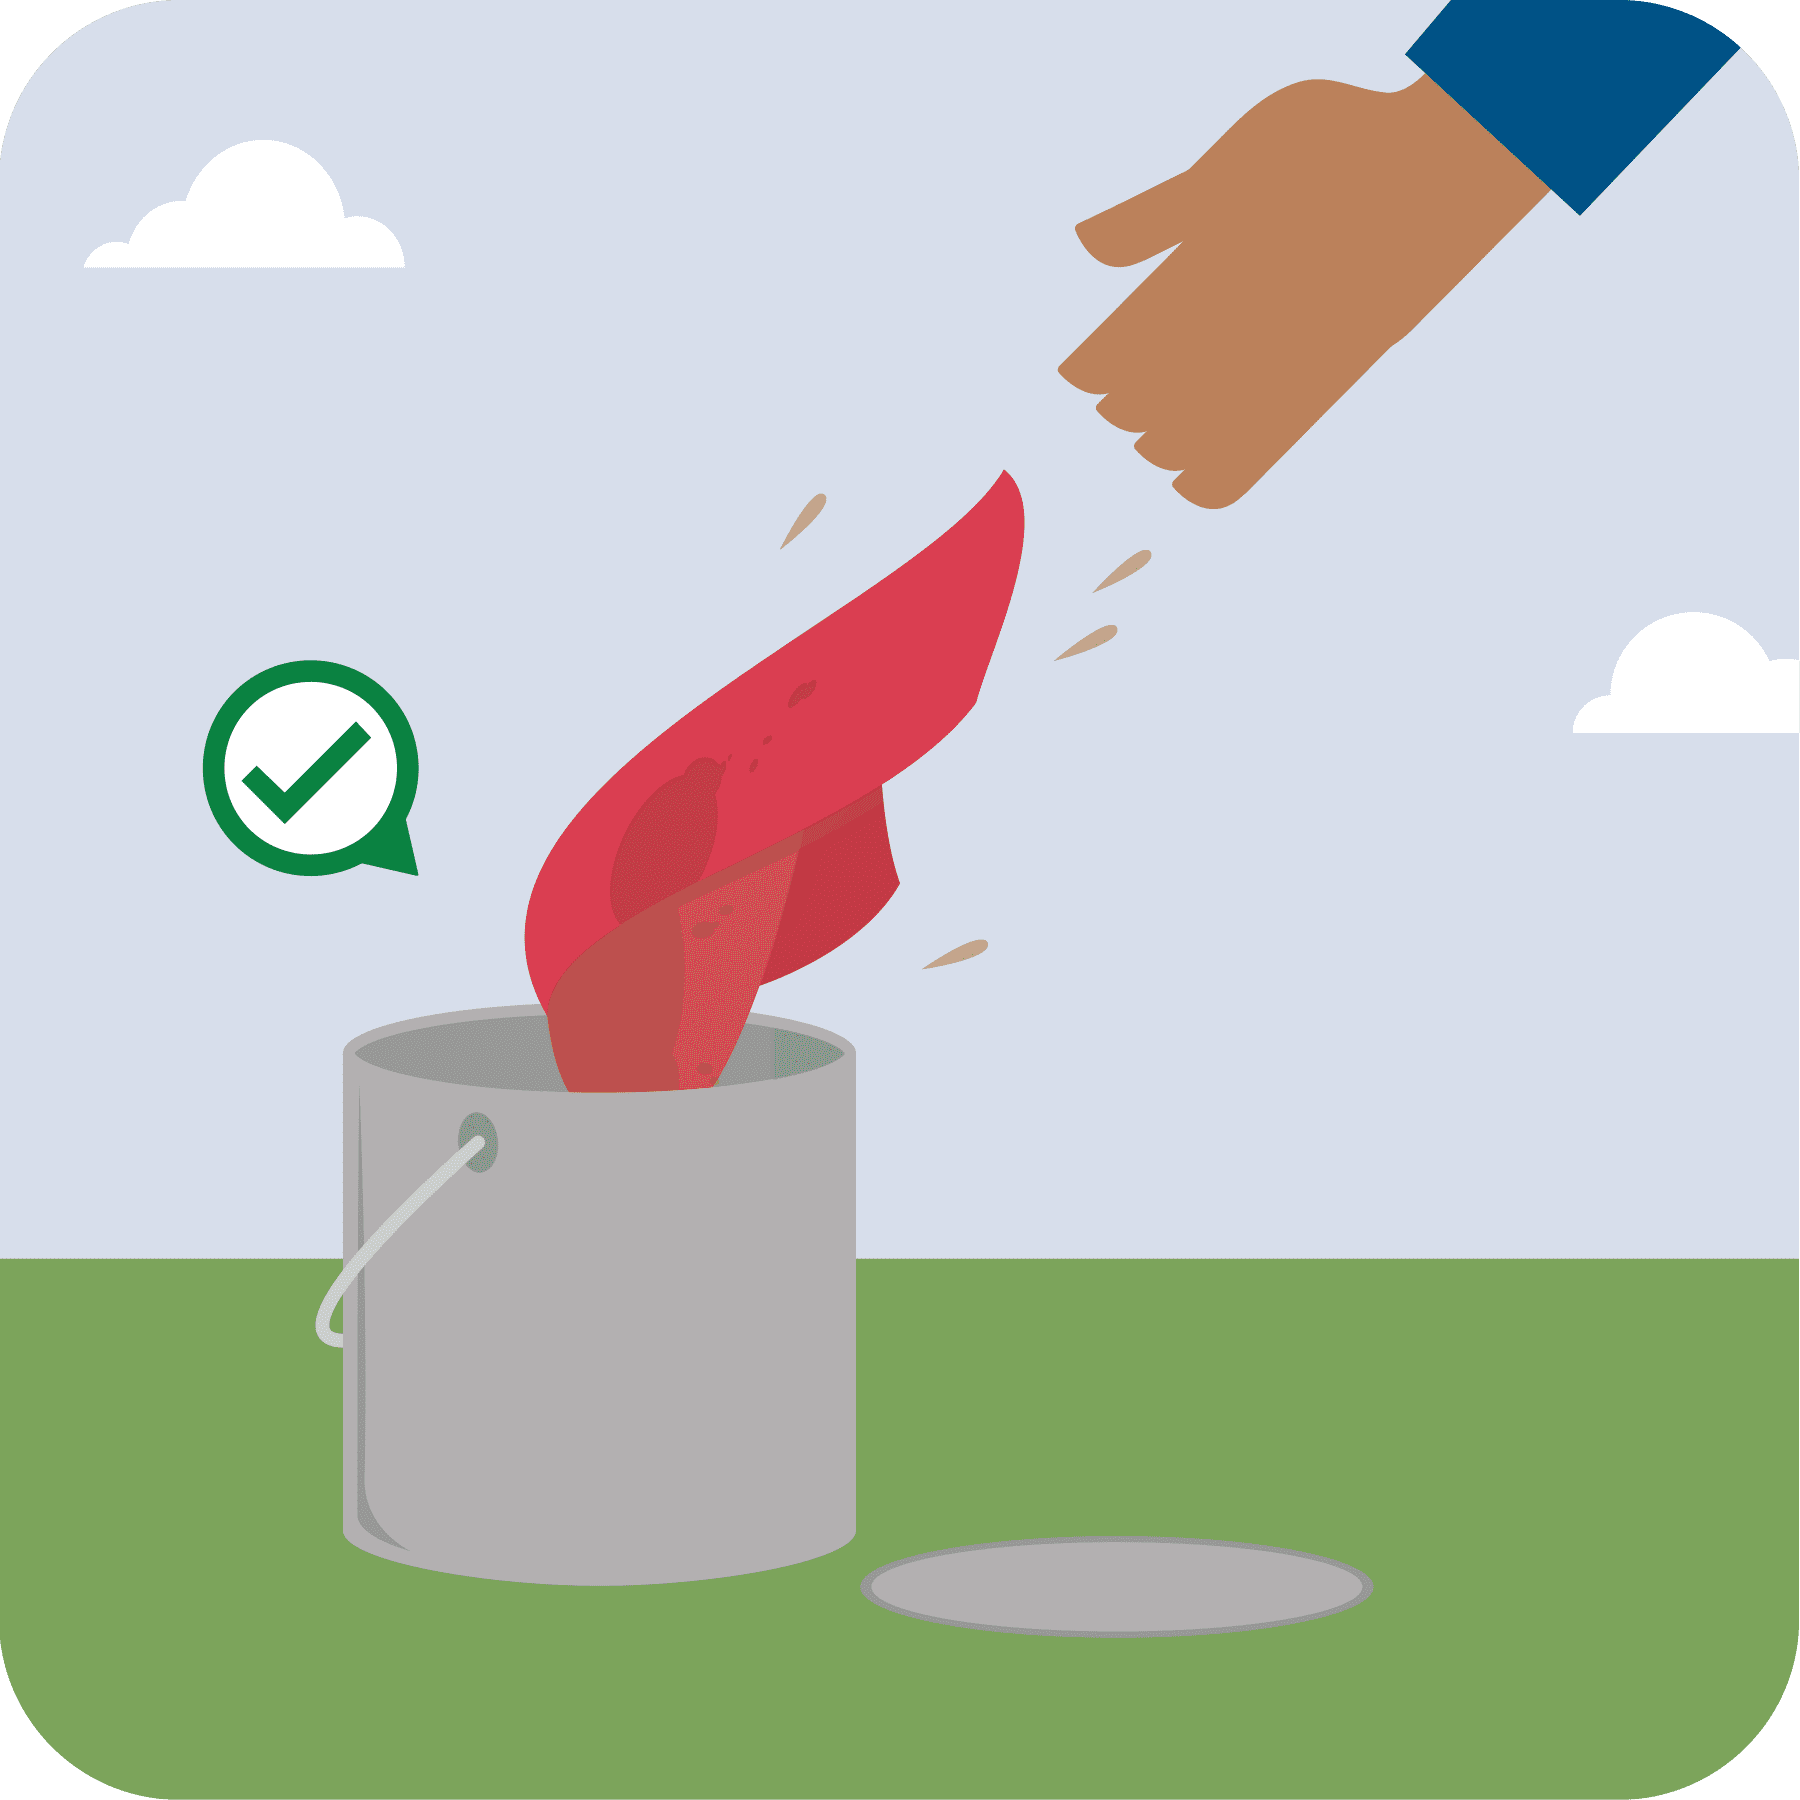 A person is throwing away a rag soaked with flammables into a metal container. A green checkmark is displayed.